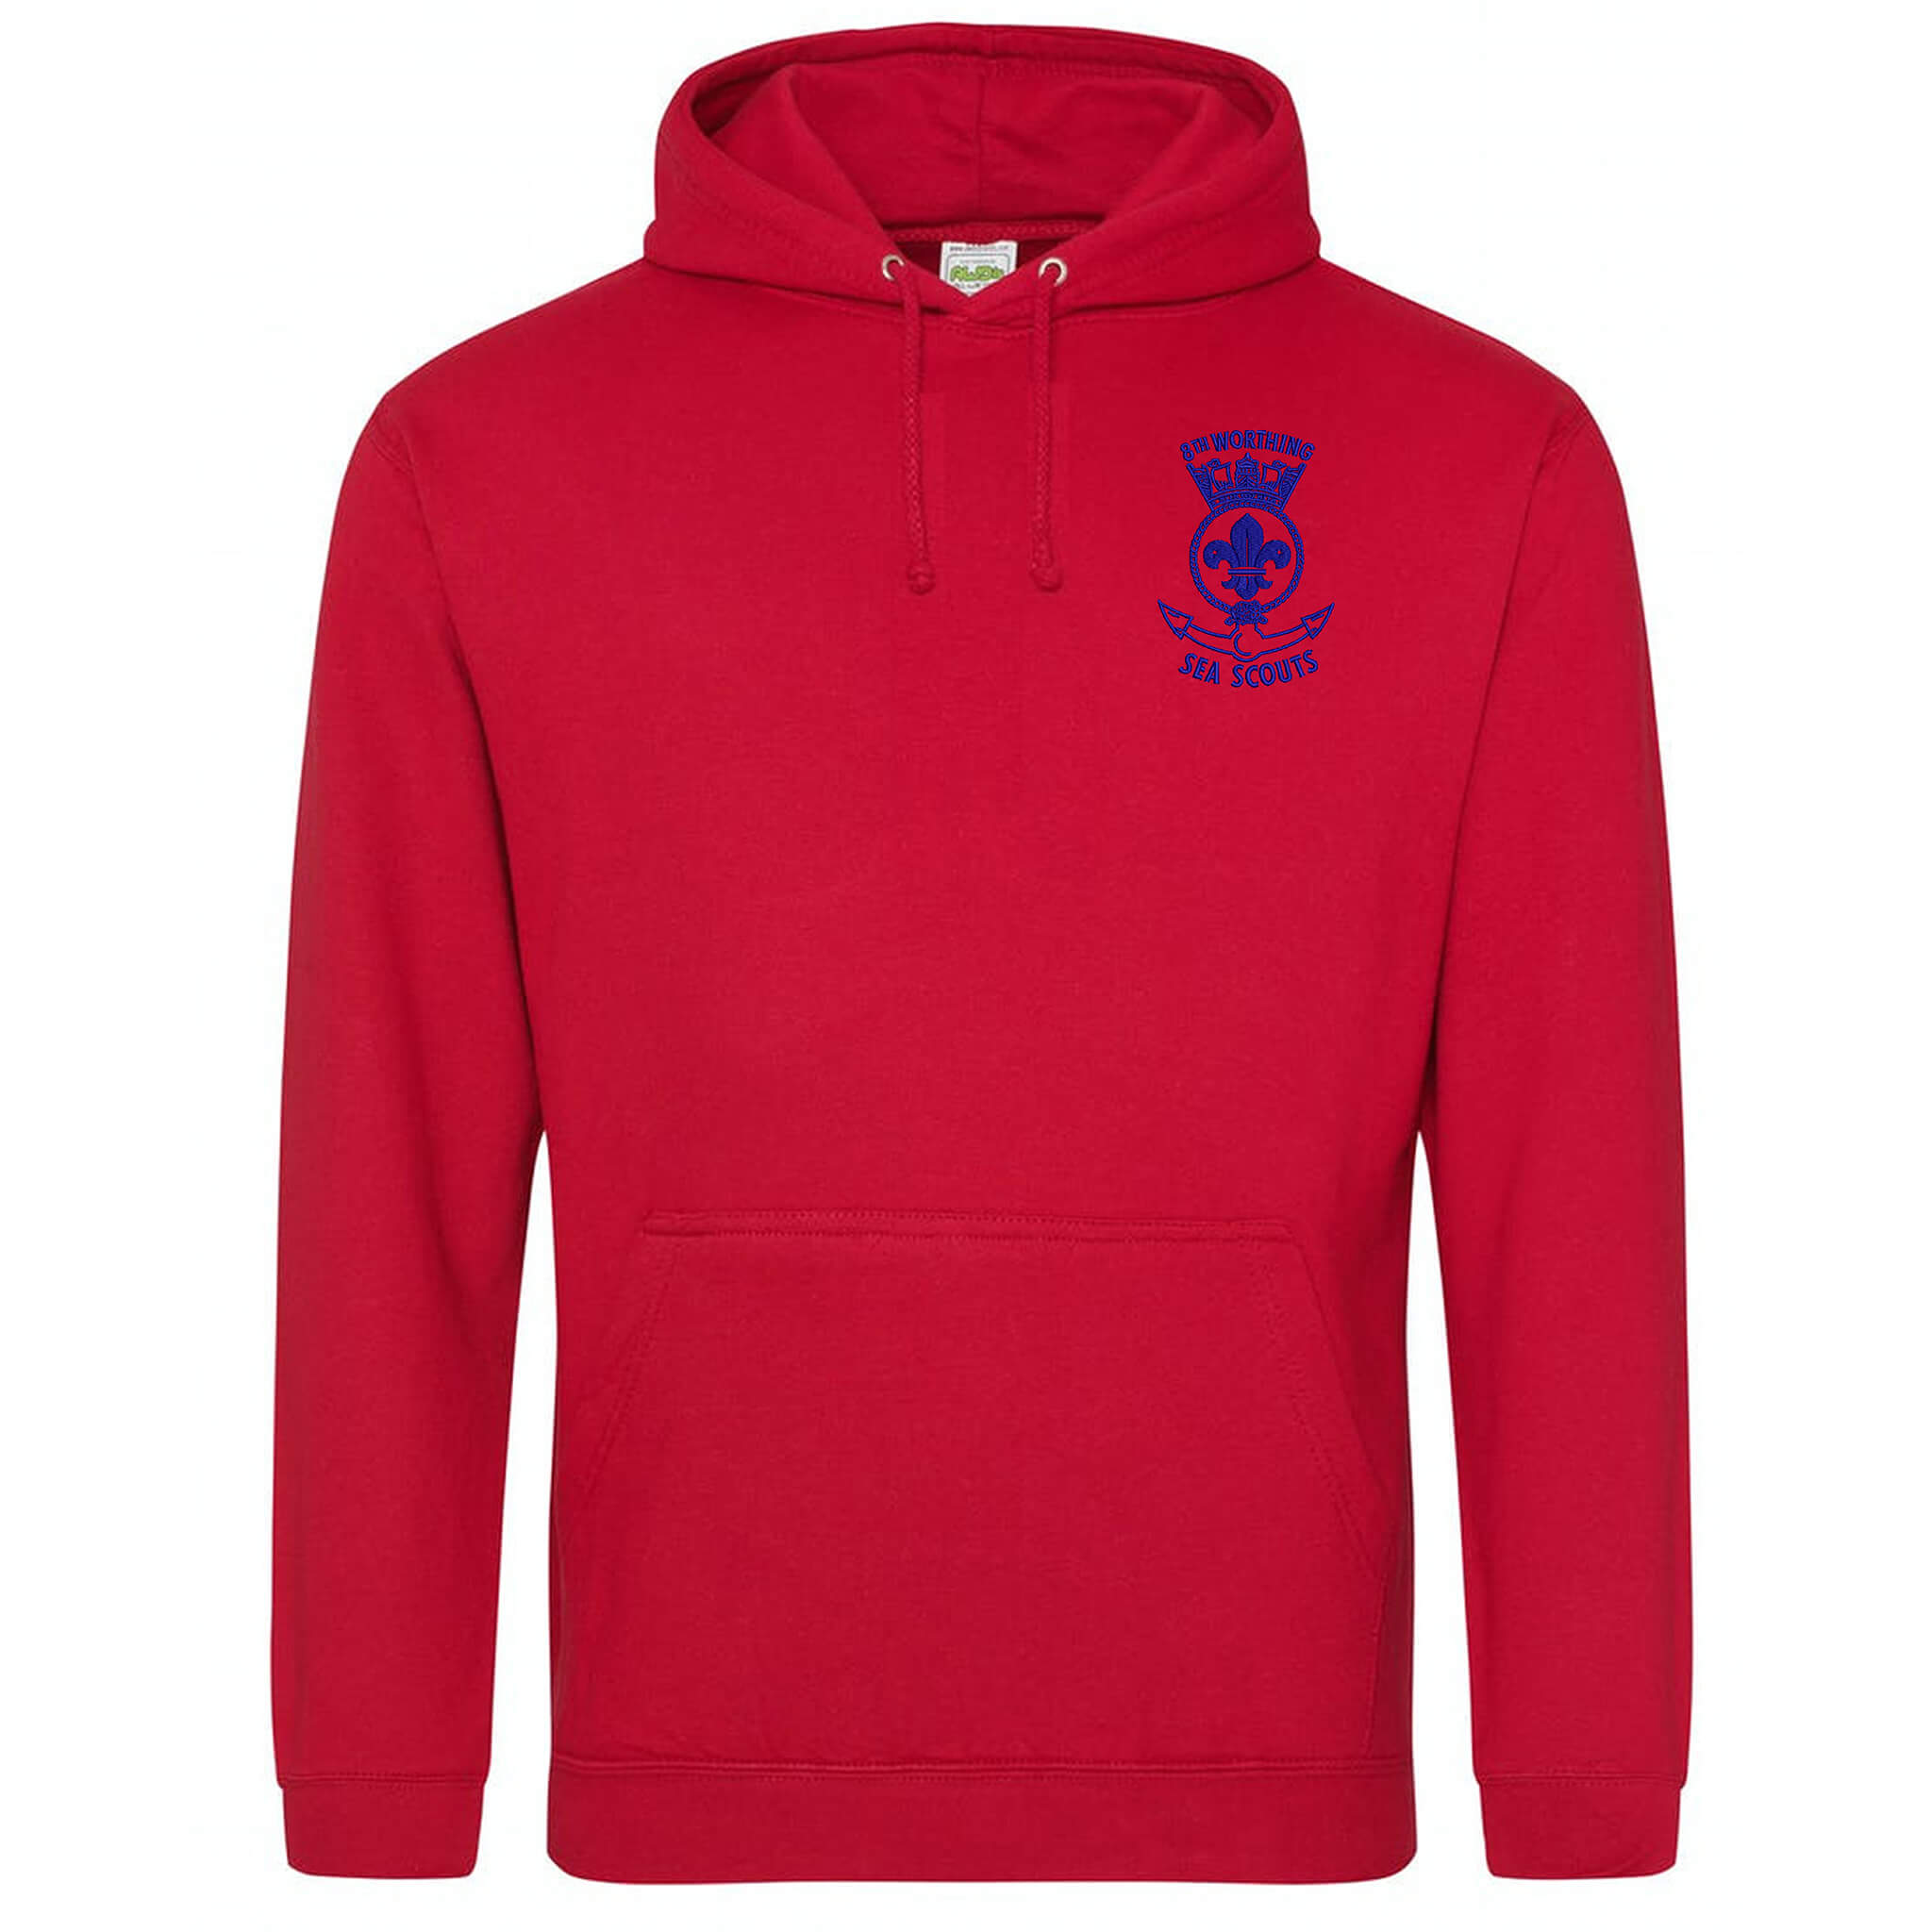 8th WORTHING SEA SCOUTS (SCOUTS) EMBROIDERED HOODIE - Flamingo Rock®